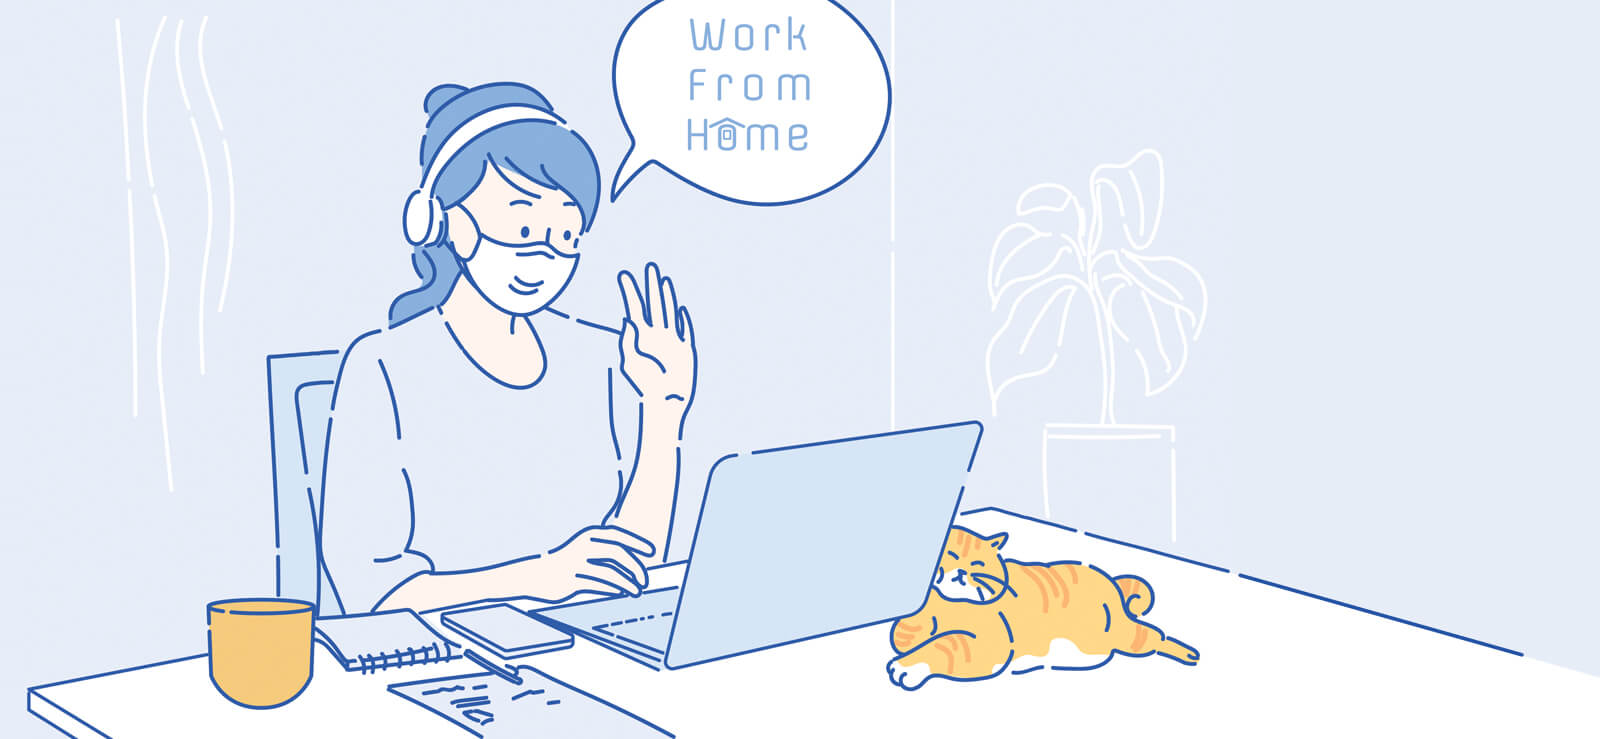 5 Security Tips for Securely Working from Home